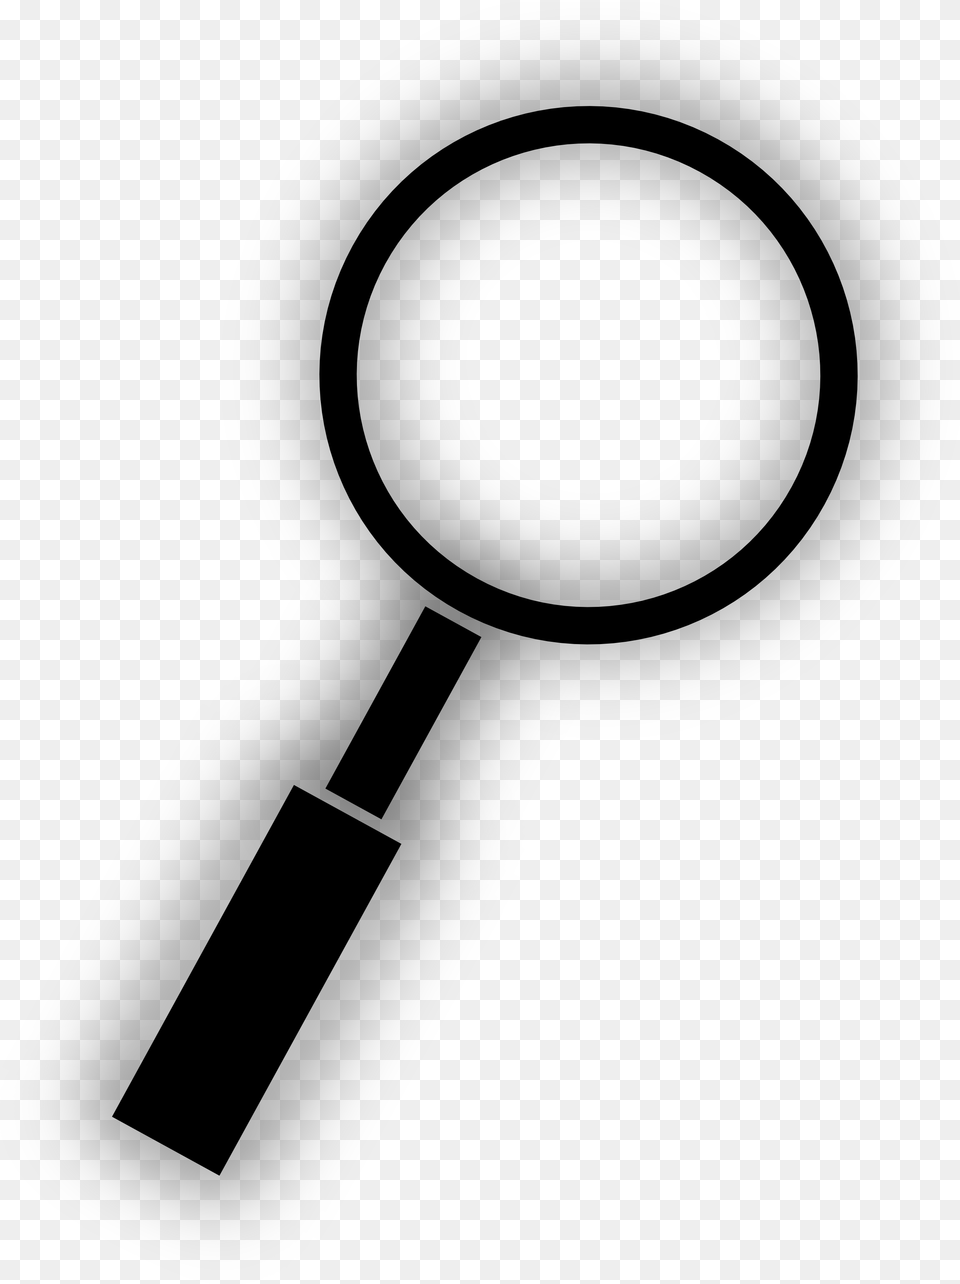 Search Magnifying Glass Icon Free Clip Art, Key, Nature, Astronomy, Moon Png Image